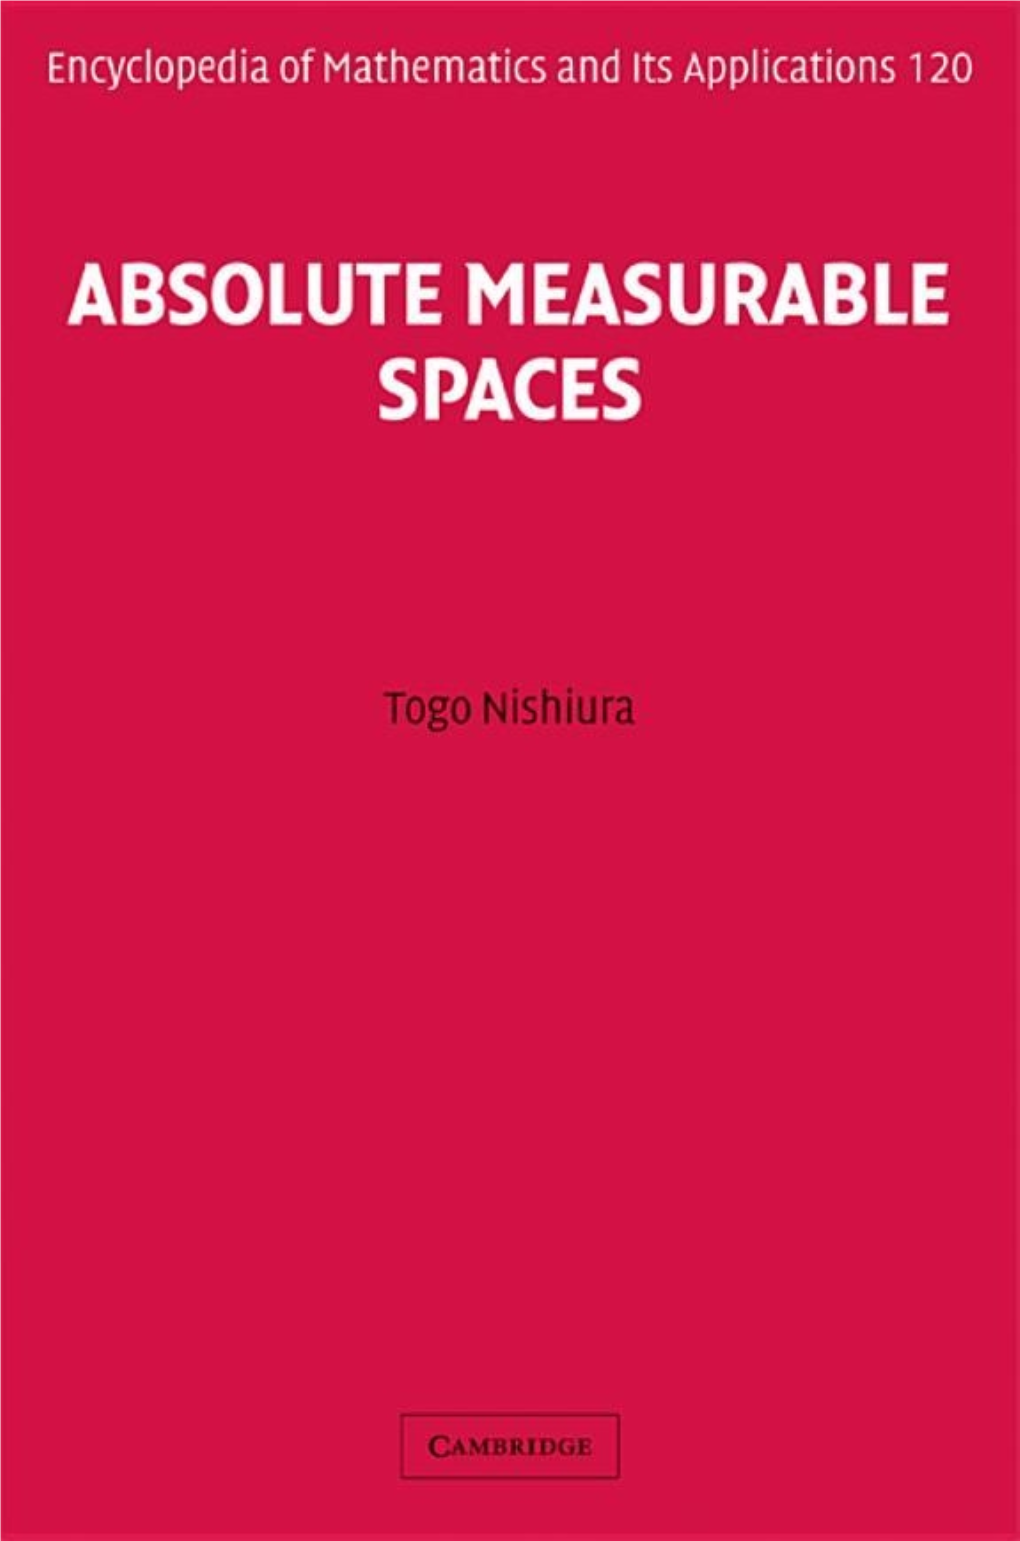 Absolute Measurable Spaces ENCYCLOPEDIAOF MATHEMATICSAND ITS APPLICATIONS